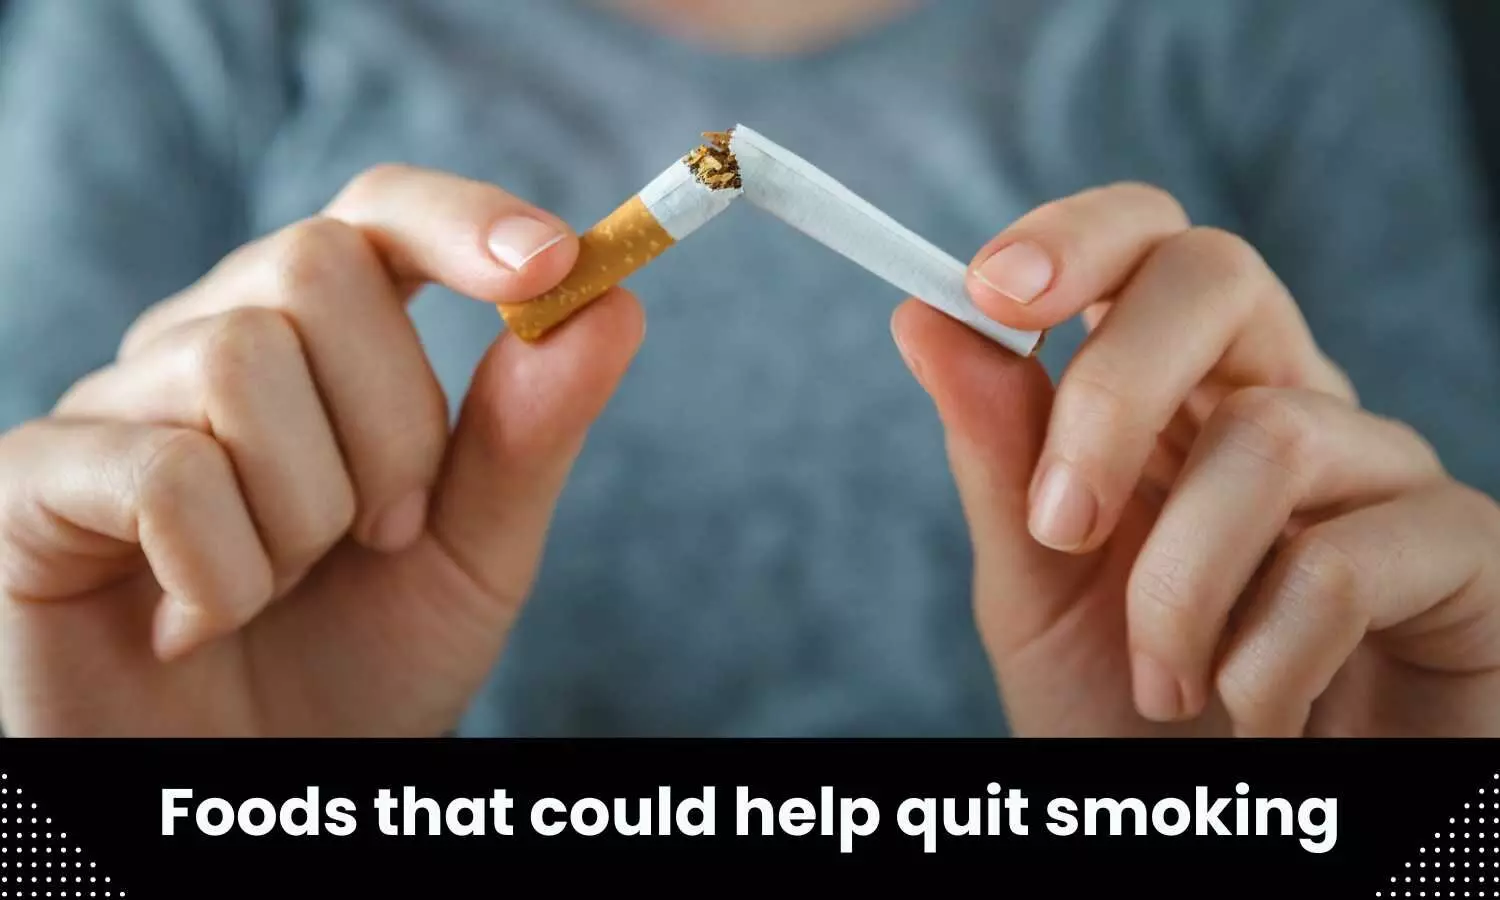 Foods that could help quit smoking